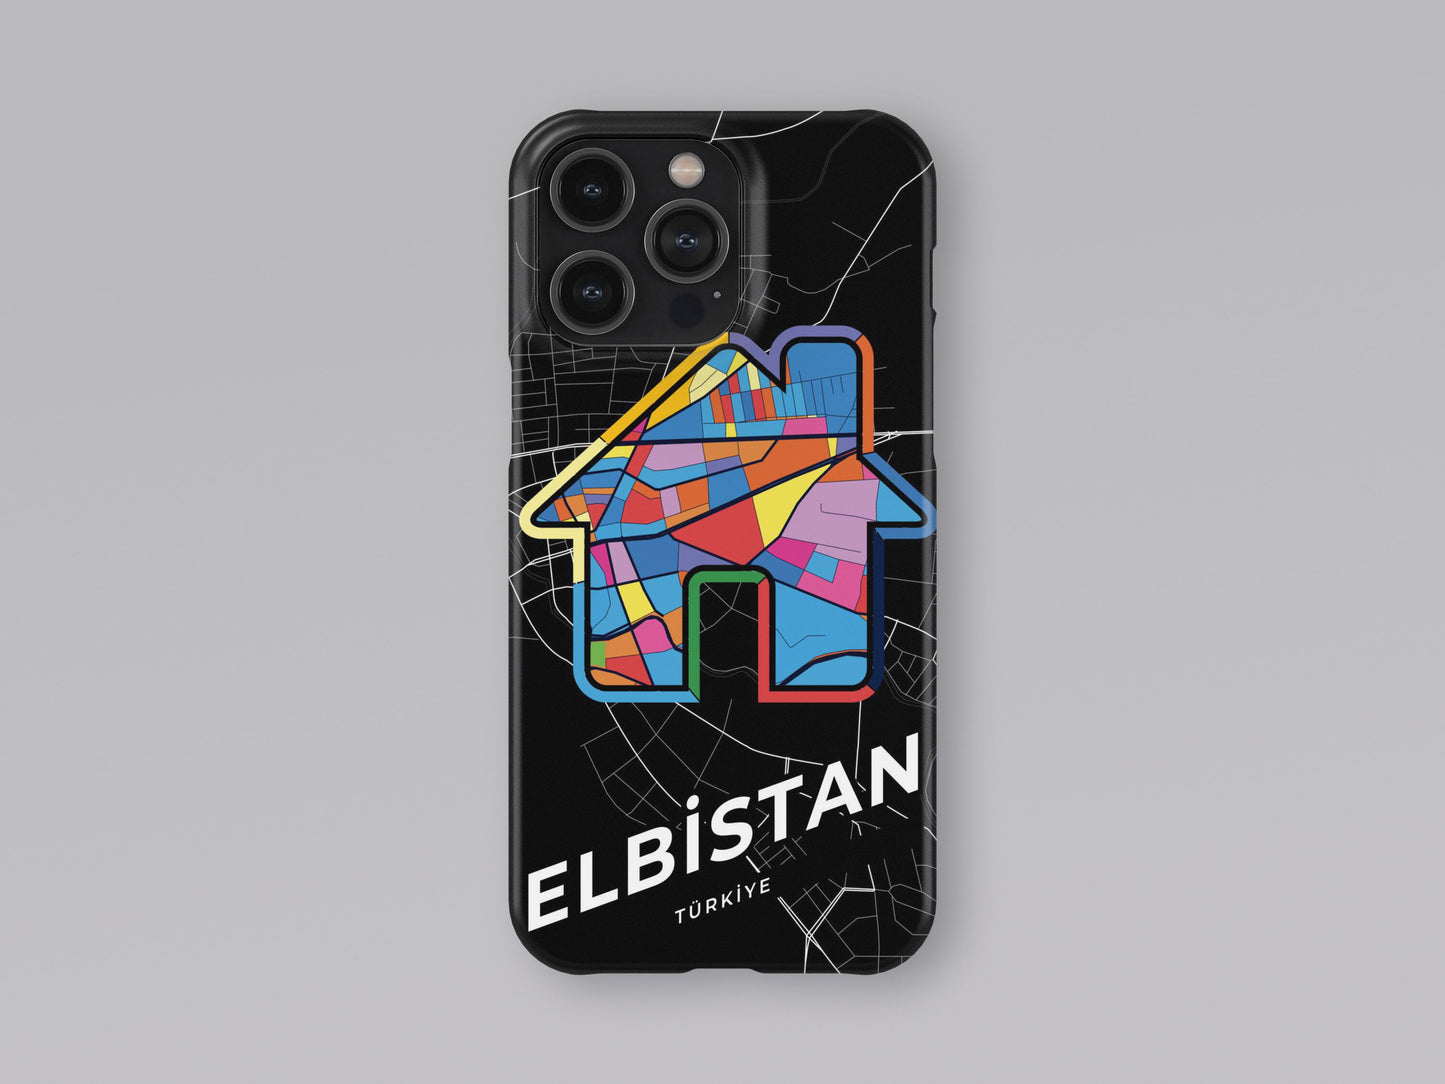 Elbistan Turkey slim phone case with colorful icon. Birthday, wedding or housewarming gift. Couple match cases. 3